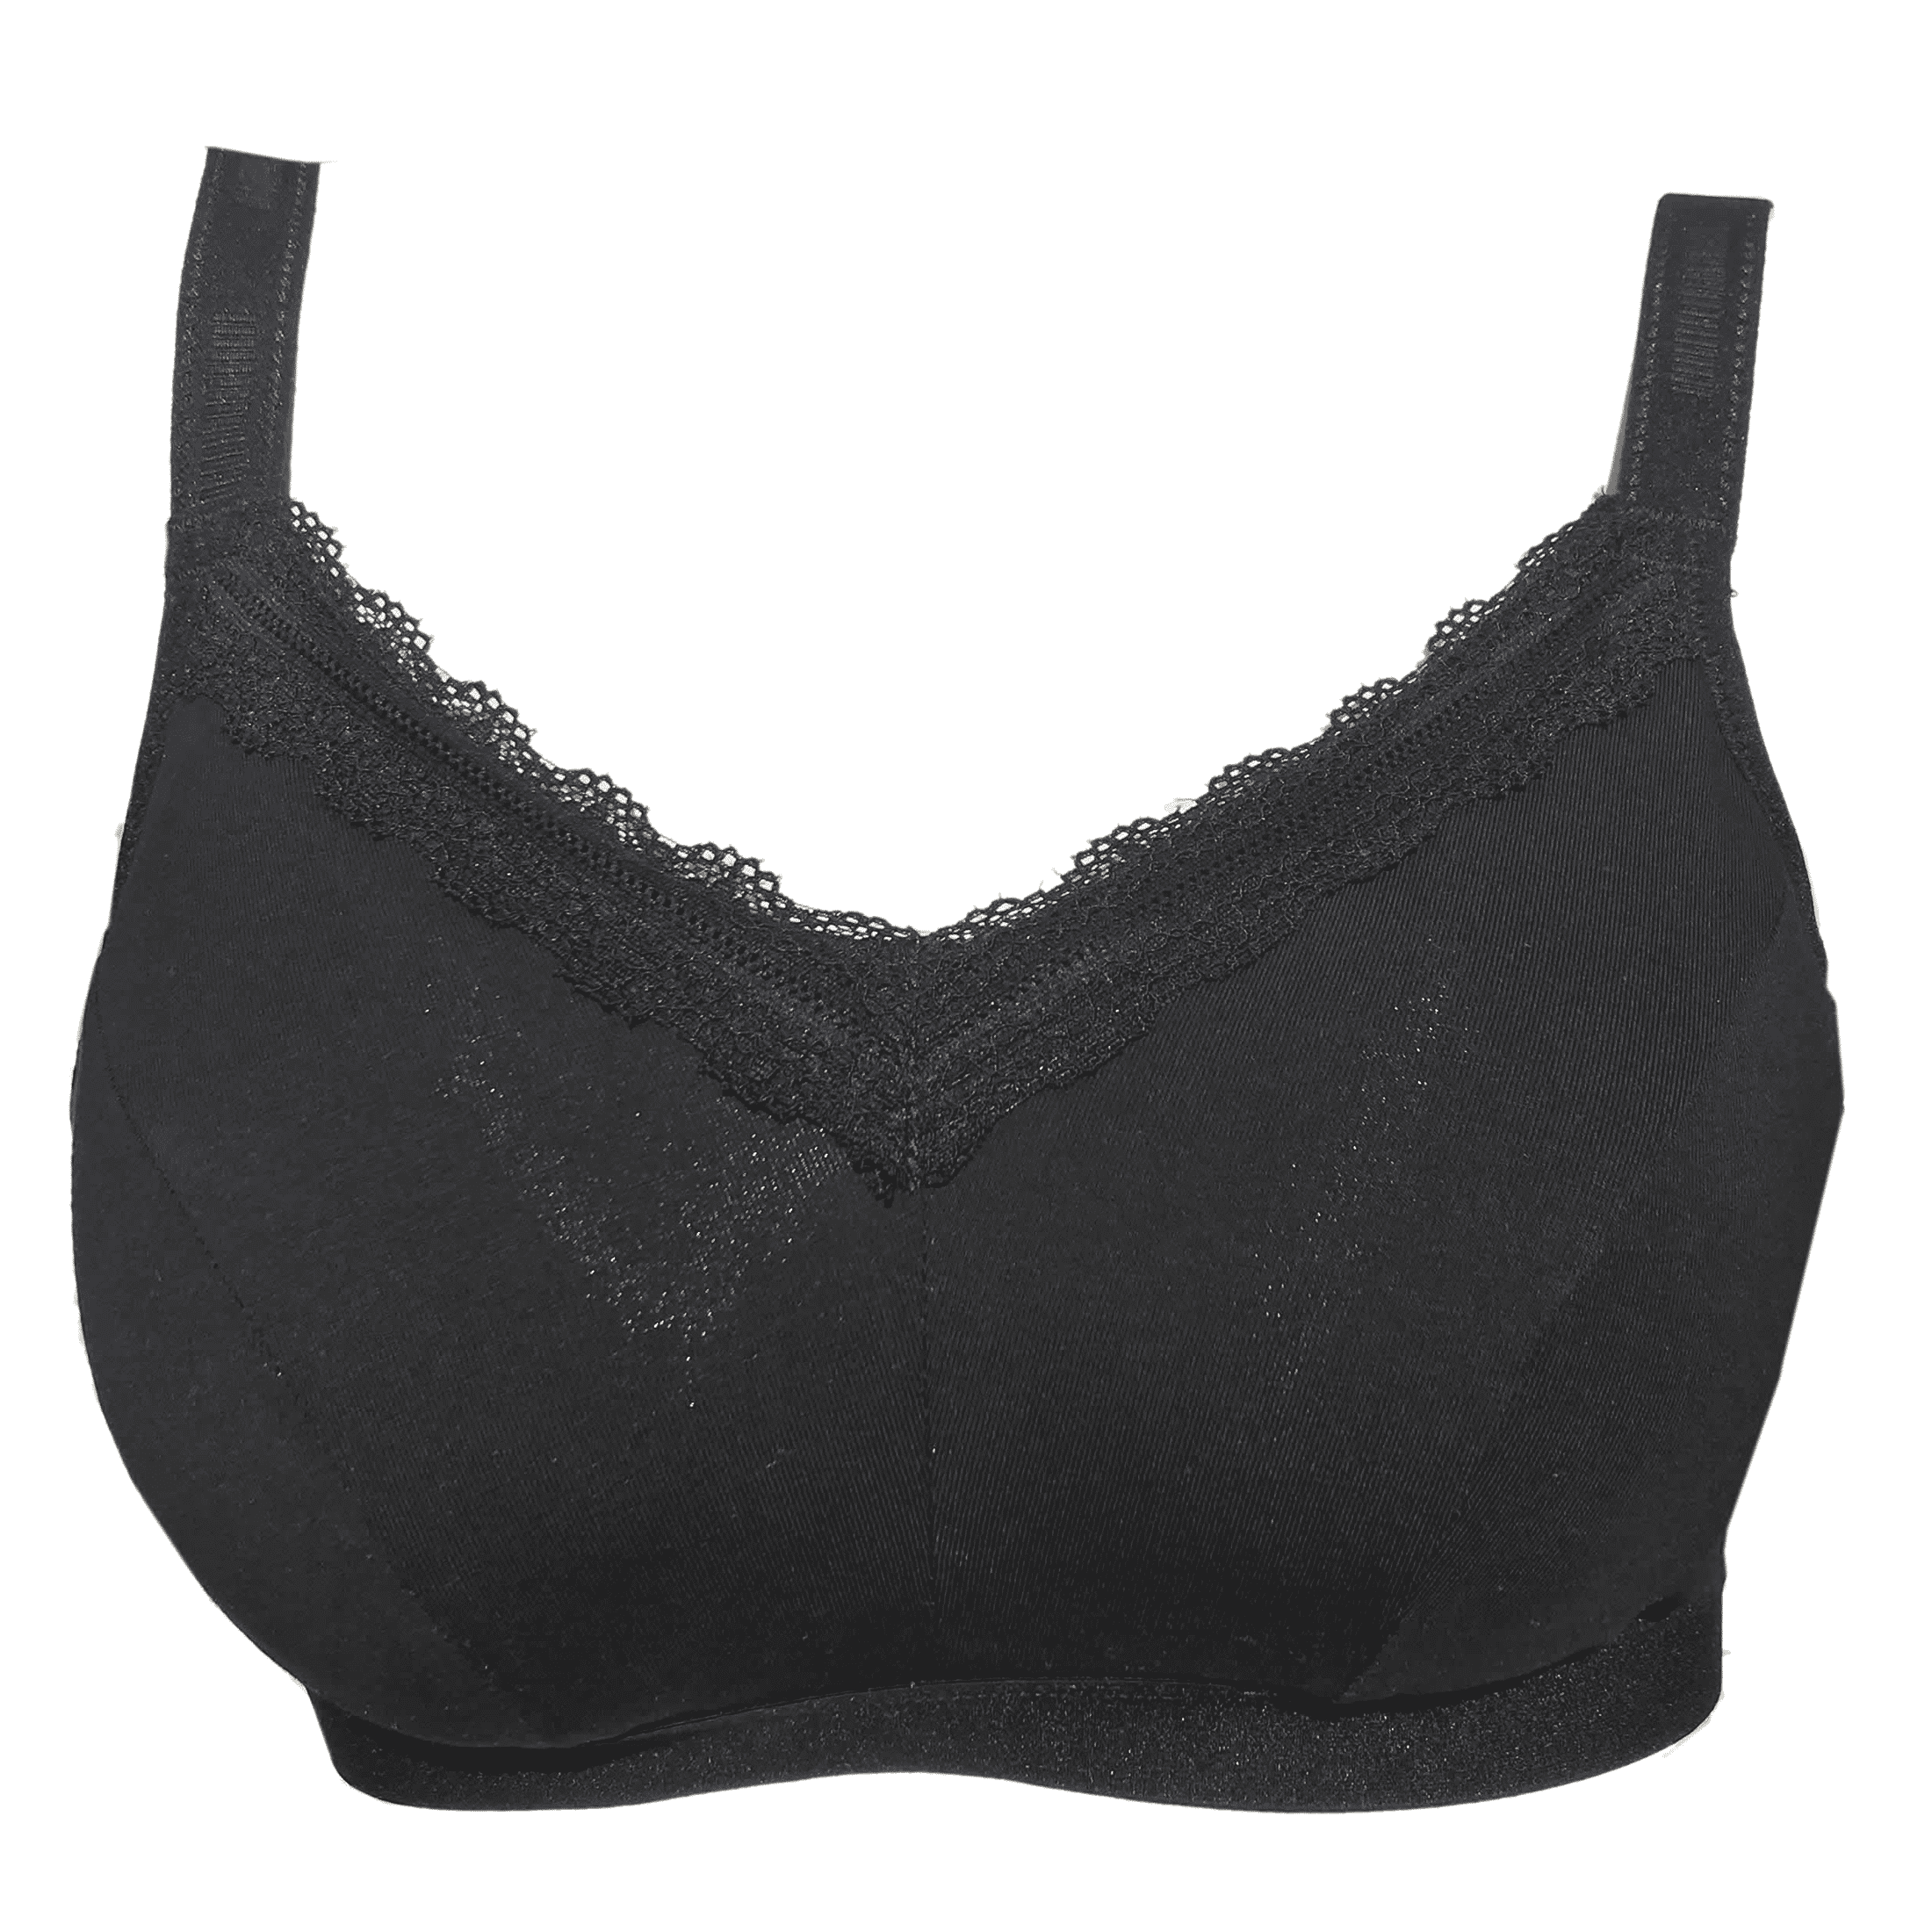 BIMEI Front-Closure Mastectomy Bra Pocket Bra for Silicone Breast forms  9915,Black,34 for 34ABCD